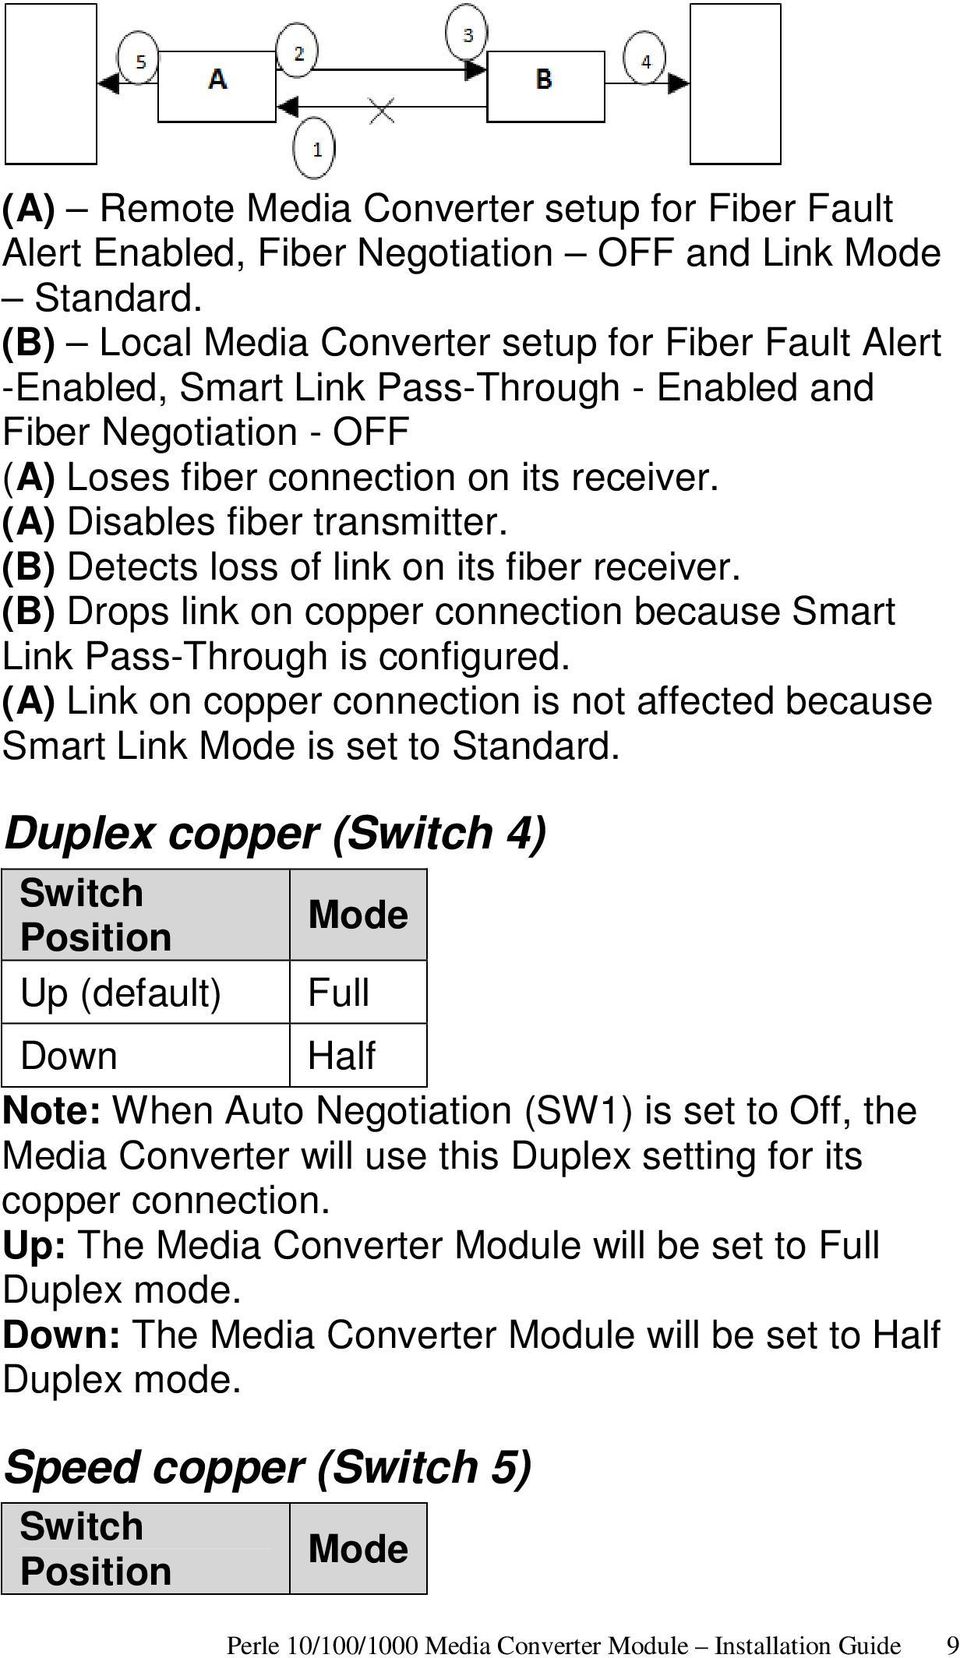 (A) Disables fiber transmitter. (B) Detects loss of link on its fiber receiver. (B) Drops link on copper connection because Smart Link Pass-Through is configured.